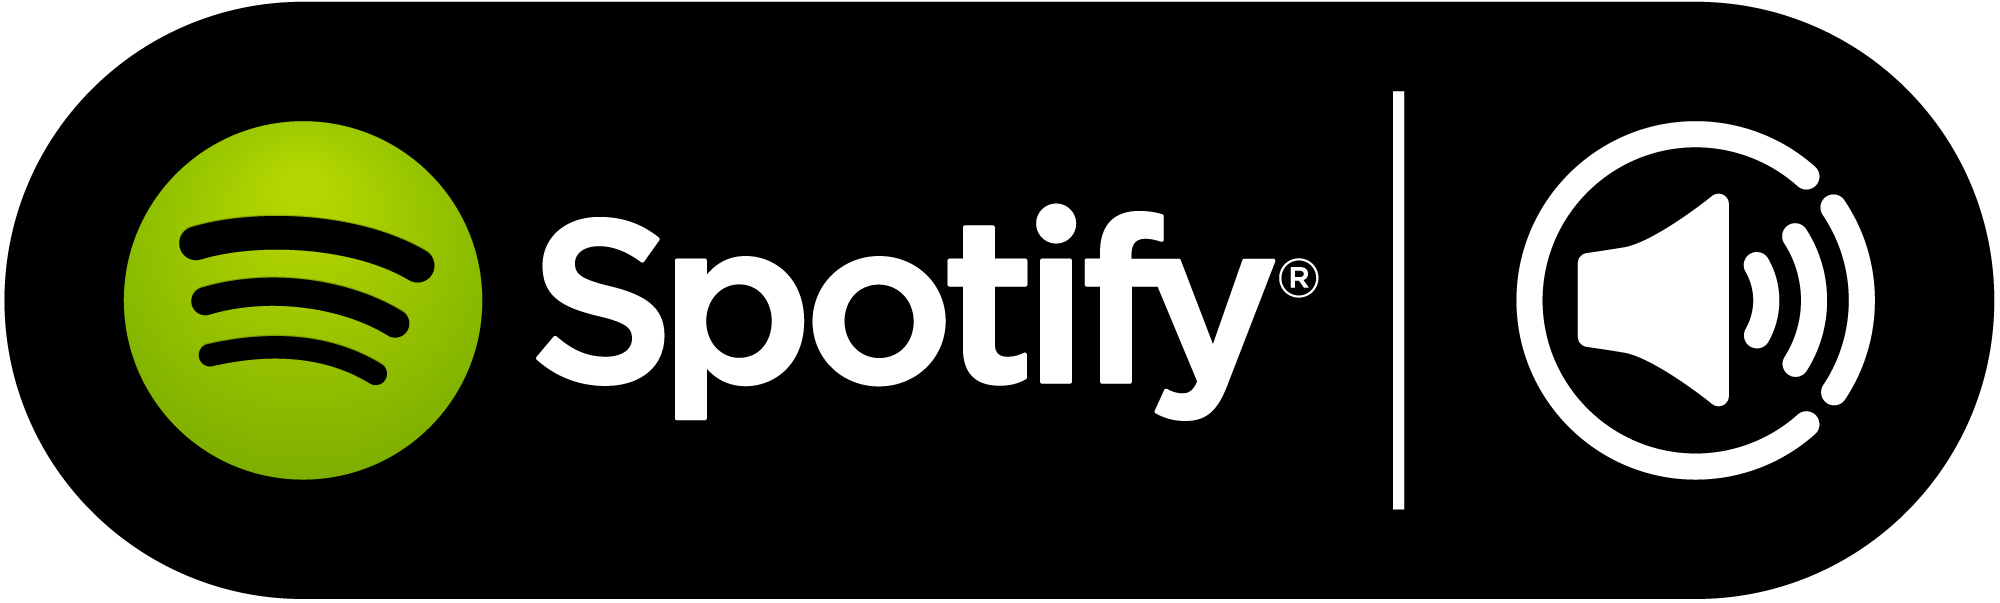 Spotify attempts to clarify lack of Google Cast support